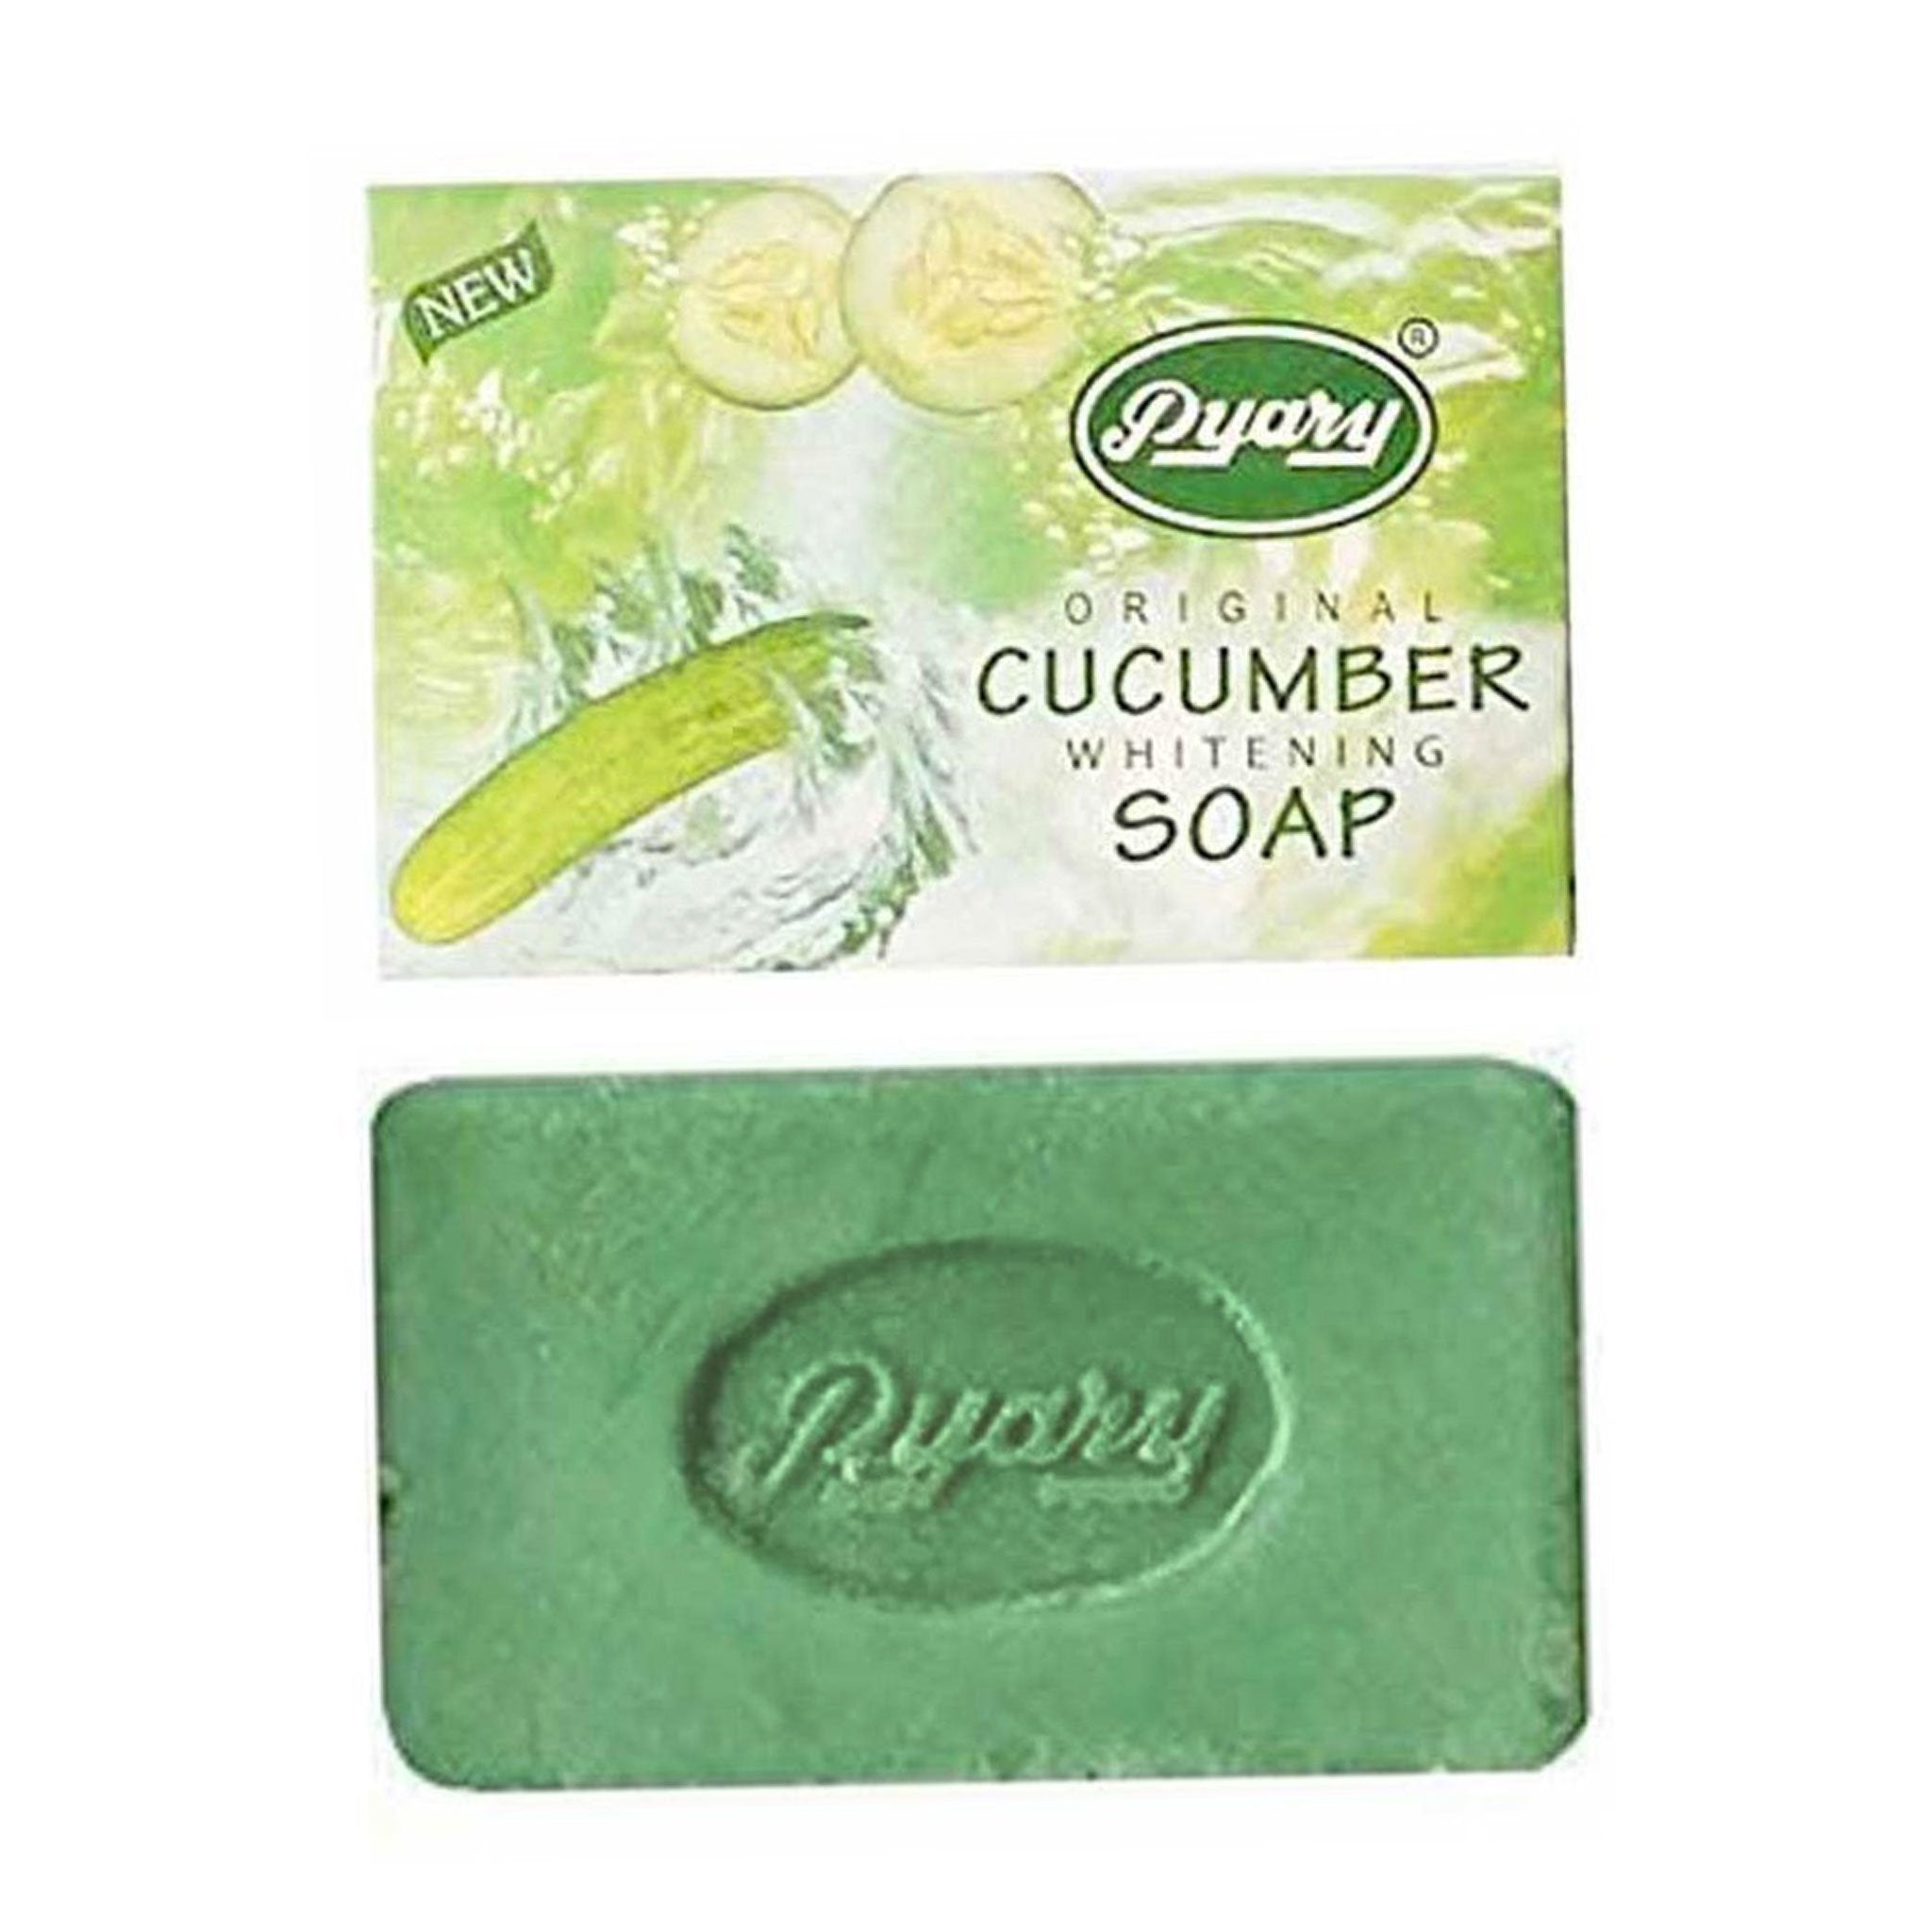 Pyary Cucumber Herbal Soap 75g Value Pack of 12 